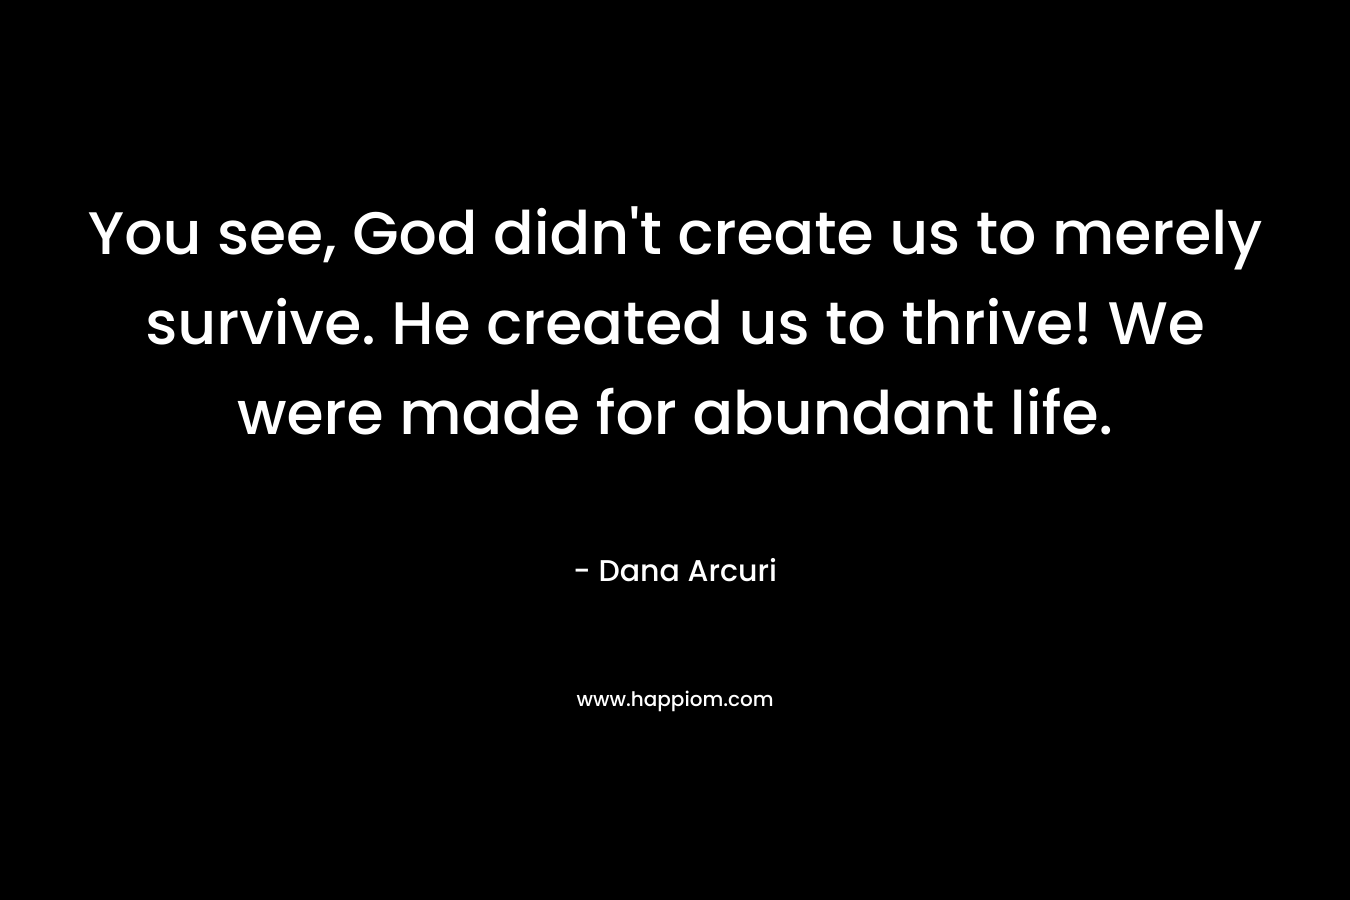 You see, God didn’t create us to merely survive. He created us to thrive! We were made for abundant life. – Dana Arcuri